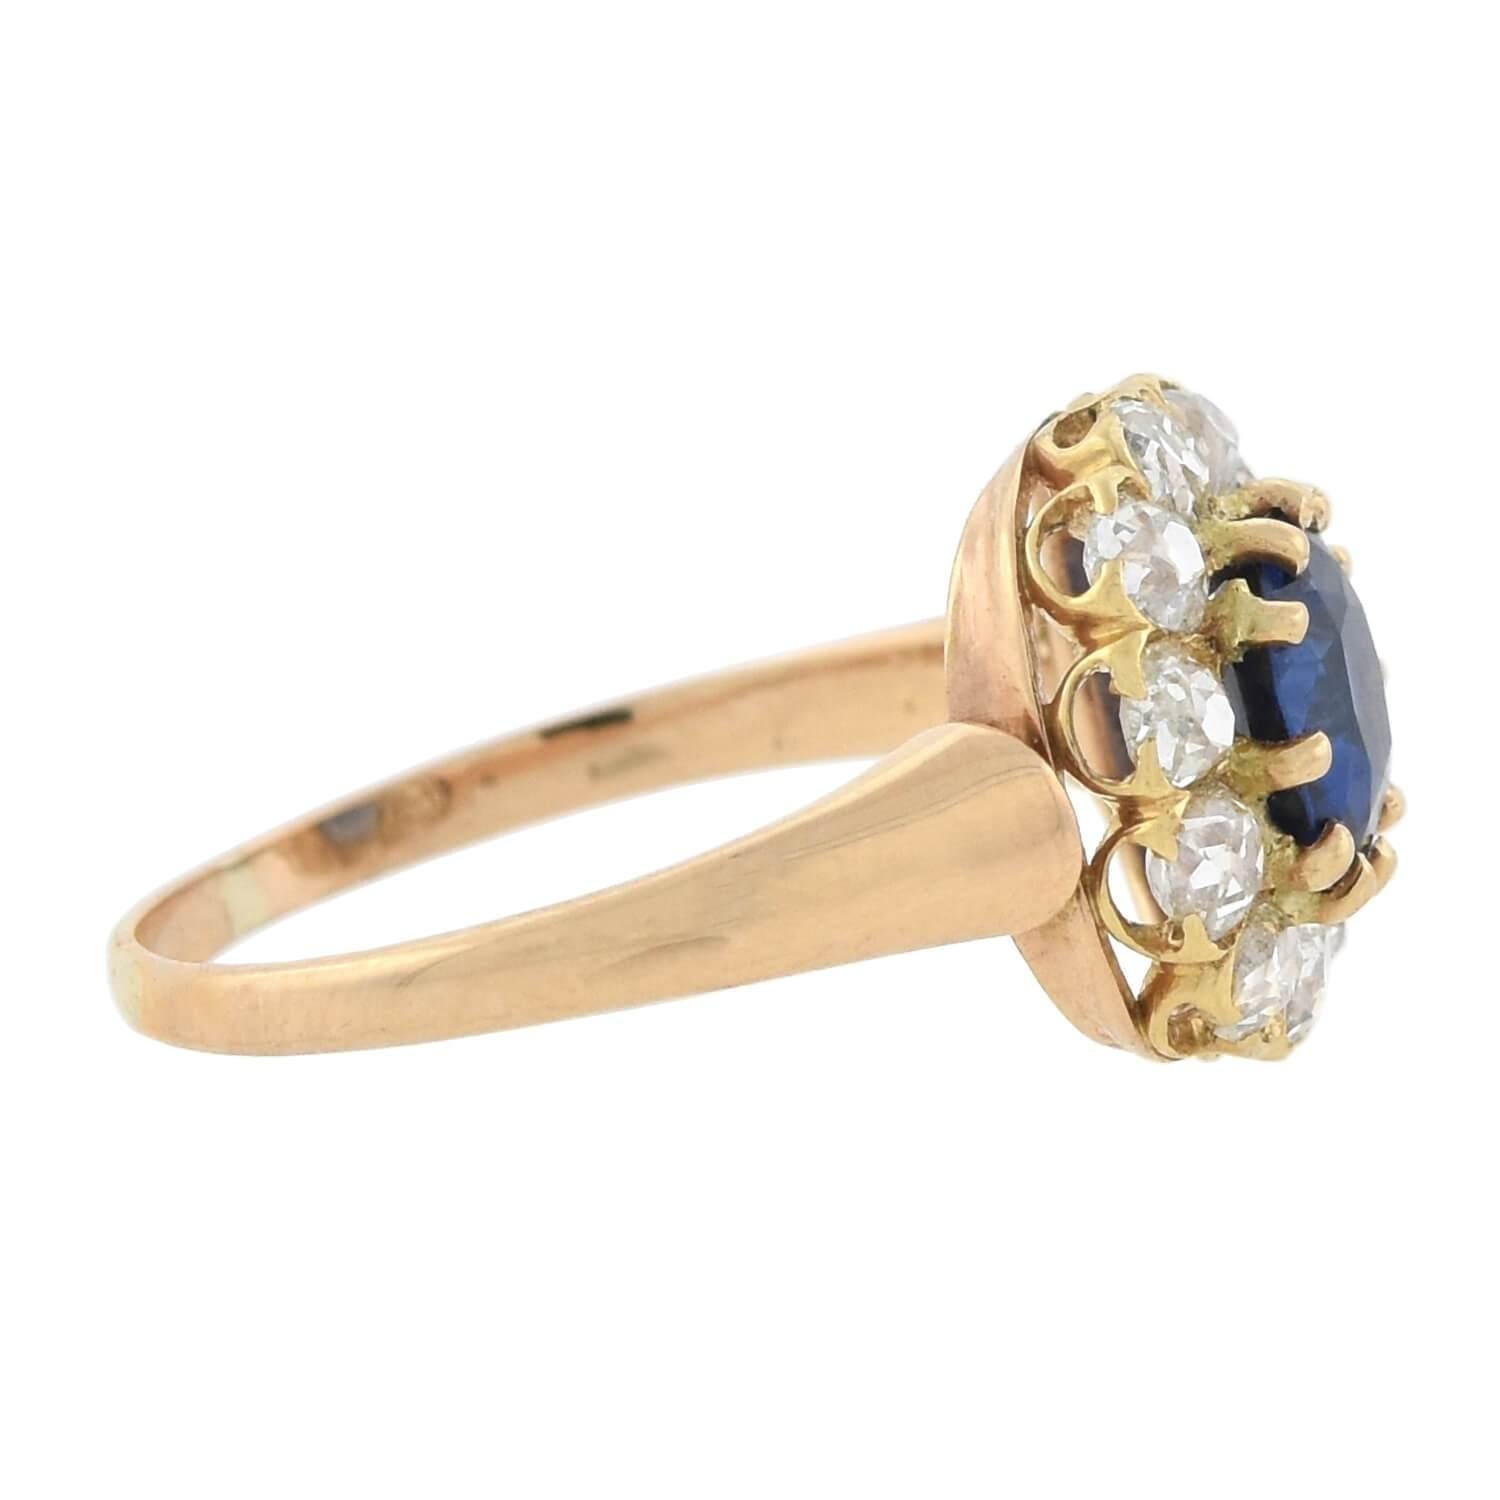 A gorgeous sapphire and diamond cluster ring from the late Victorian (ca1880) era! This beautiful 18kt gold ring features a 1.00ct natural ceylon sapphire framed at the center of a sparkling diamond border. The vivid, no-heat sapphire is prong set